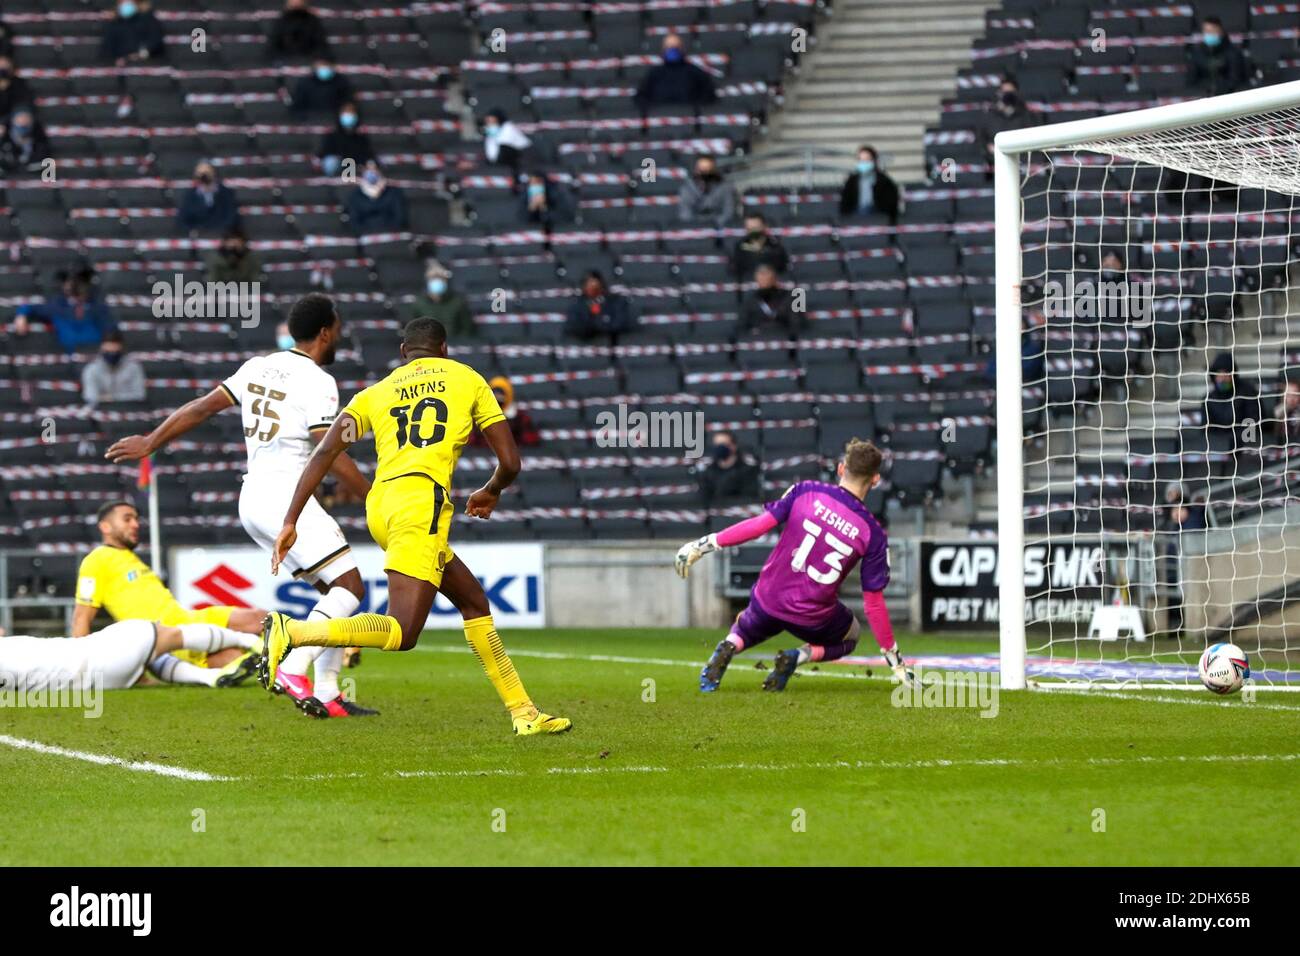 MILTON KEYNES, ENGLAND. DECEMBER 12TH. Colin Daniel scores for Burton  Albion, to take the lead to make it 1 - 0 against Milton Keynes Dons,  during the Sky Bet League One match